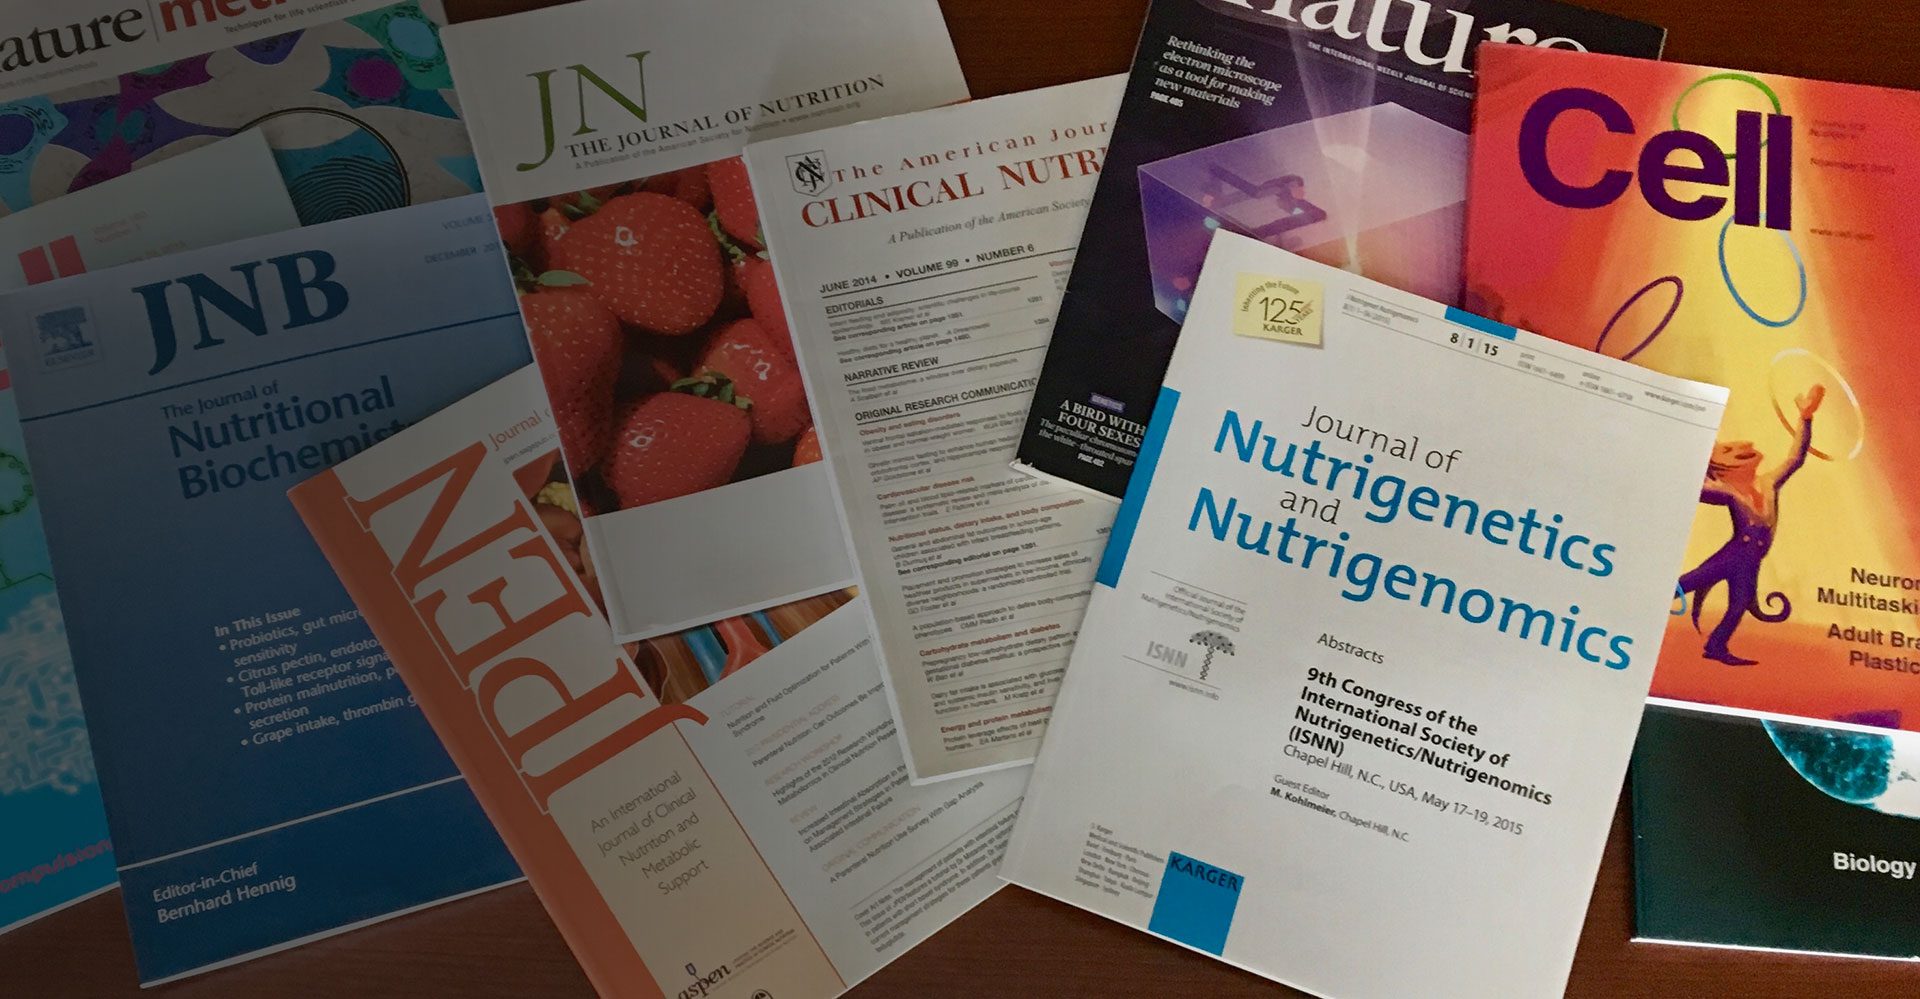 Various Nutritional Research Institute books are spread out.